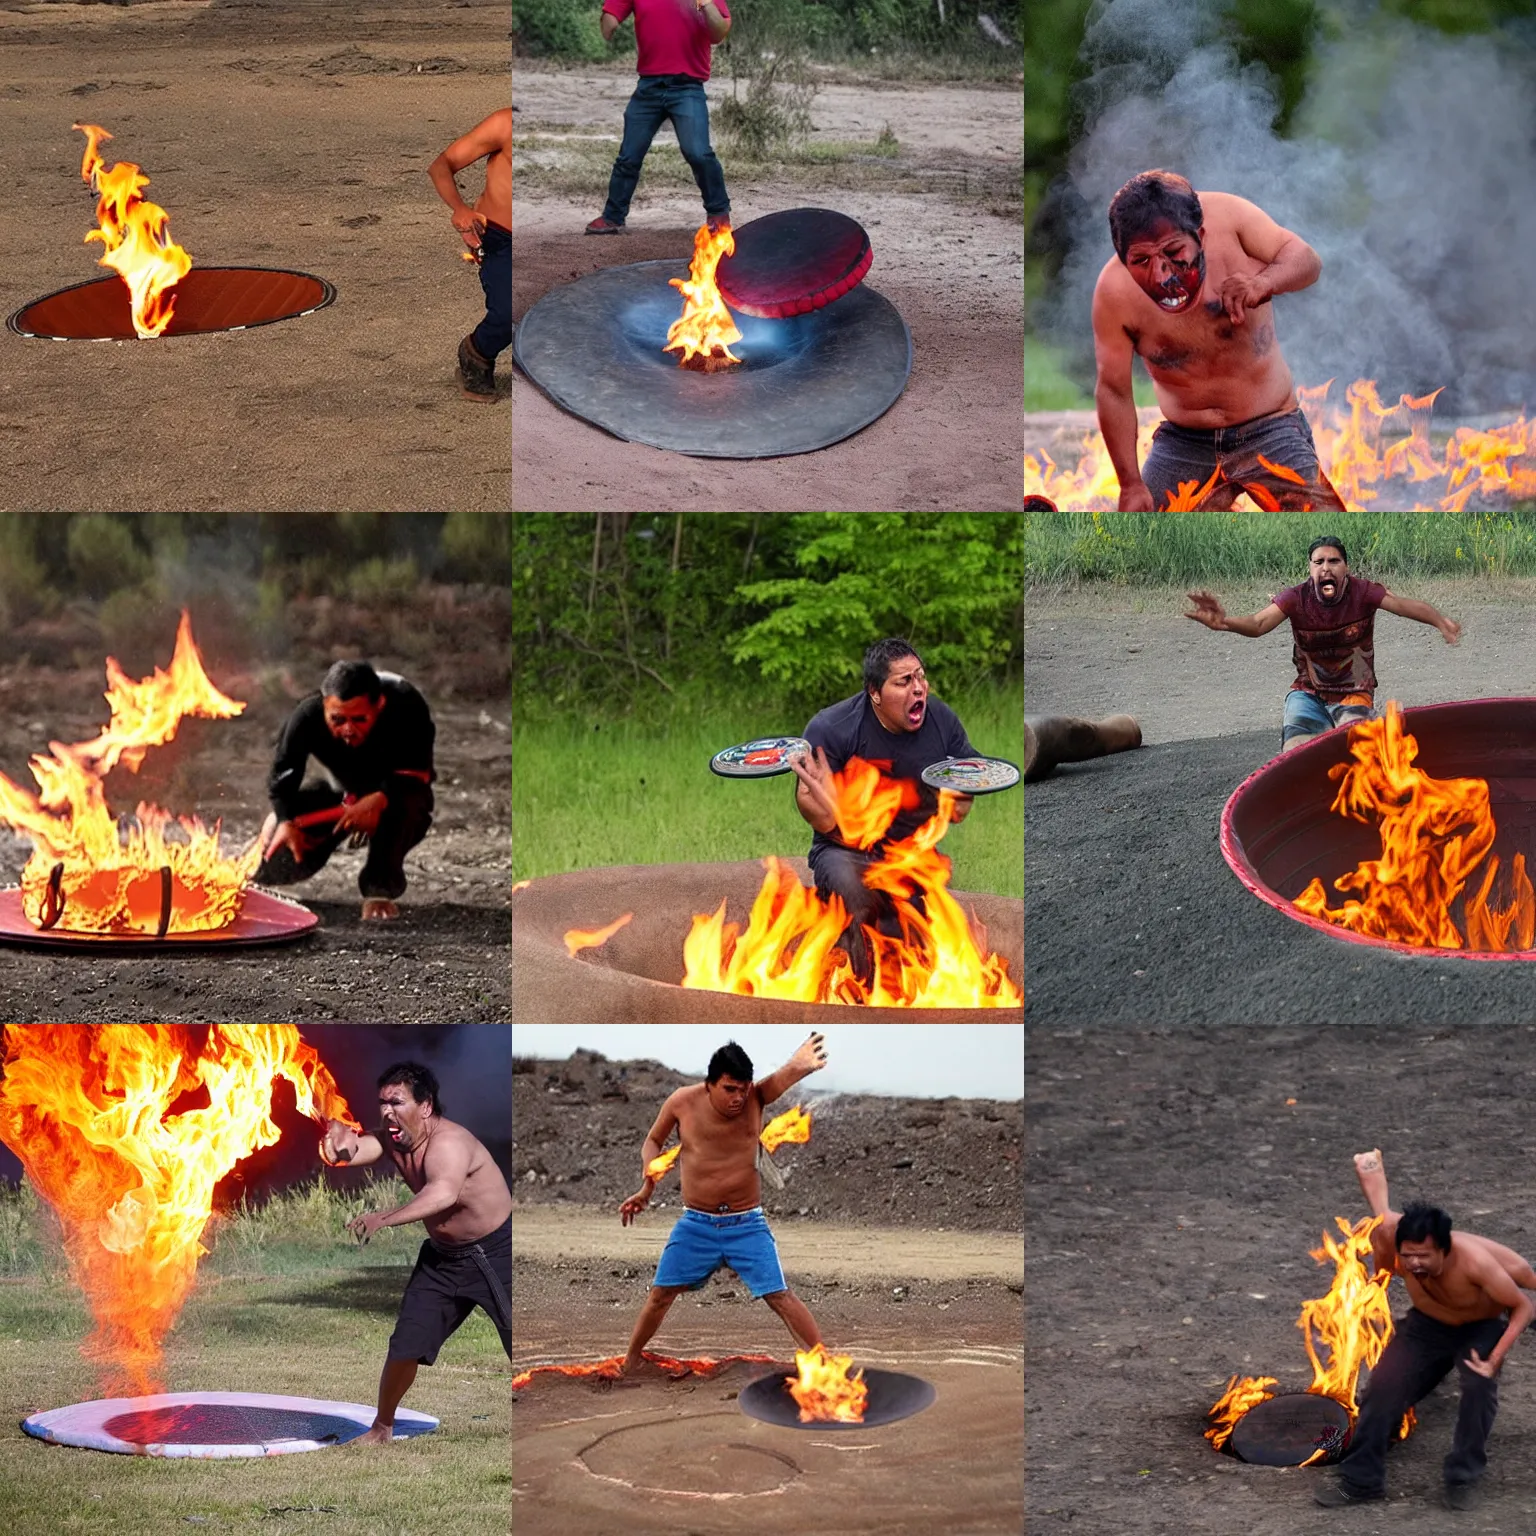 Prompt: first nations man yelling angrily while throwing a frisbee into a pit of fire